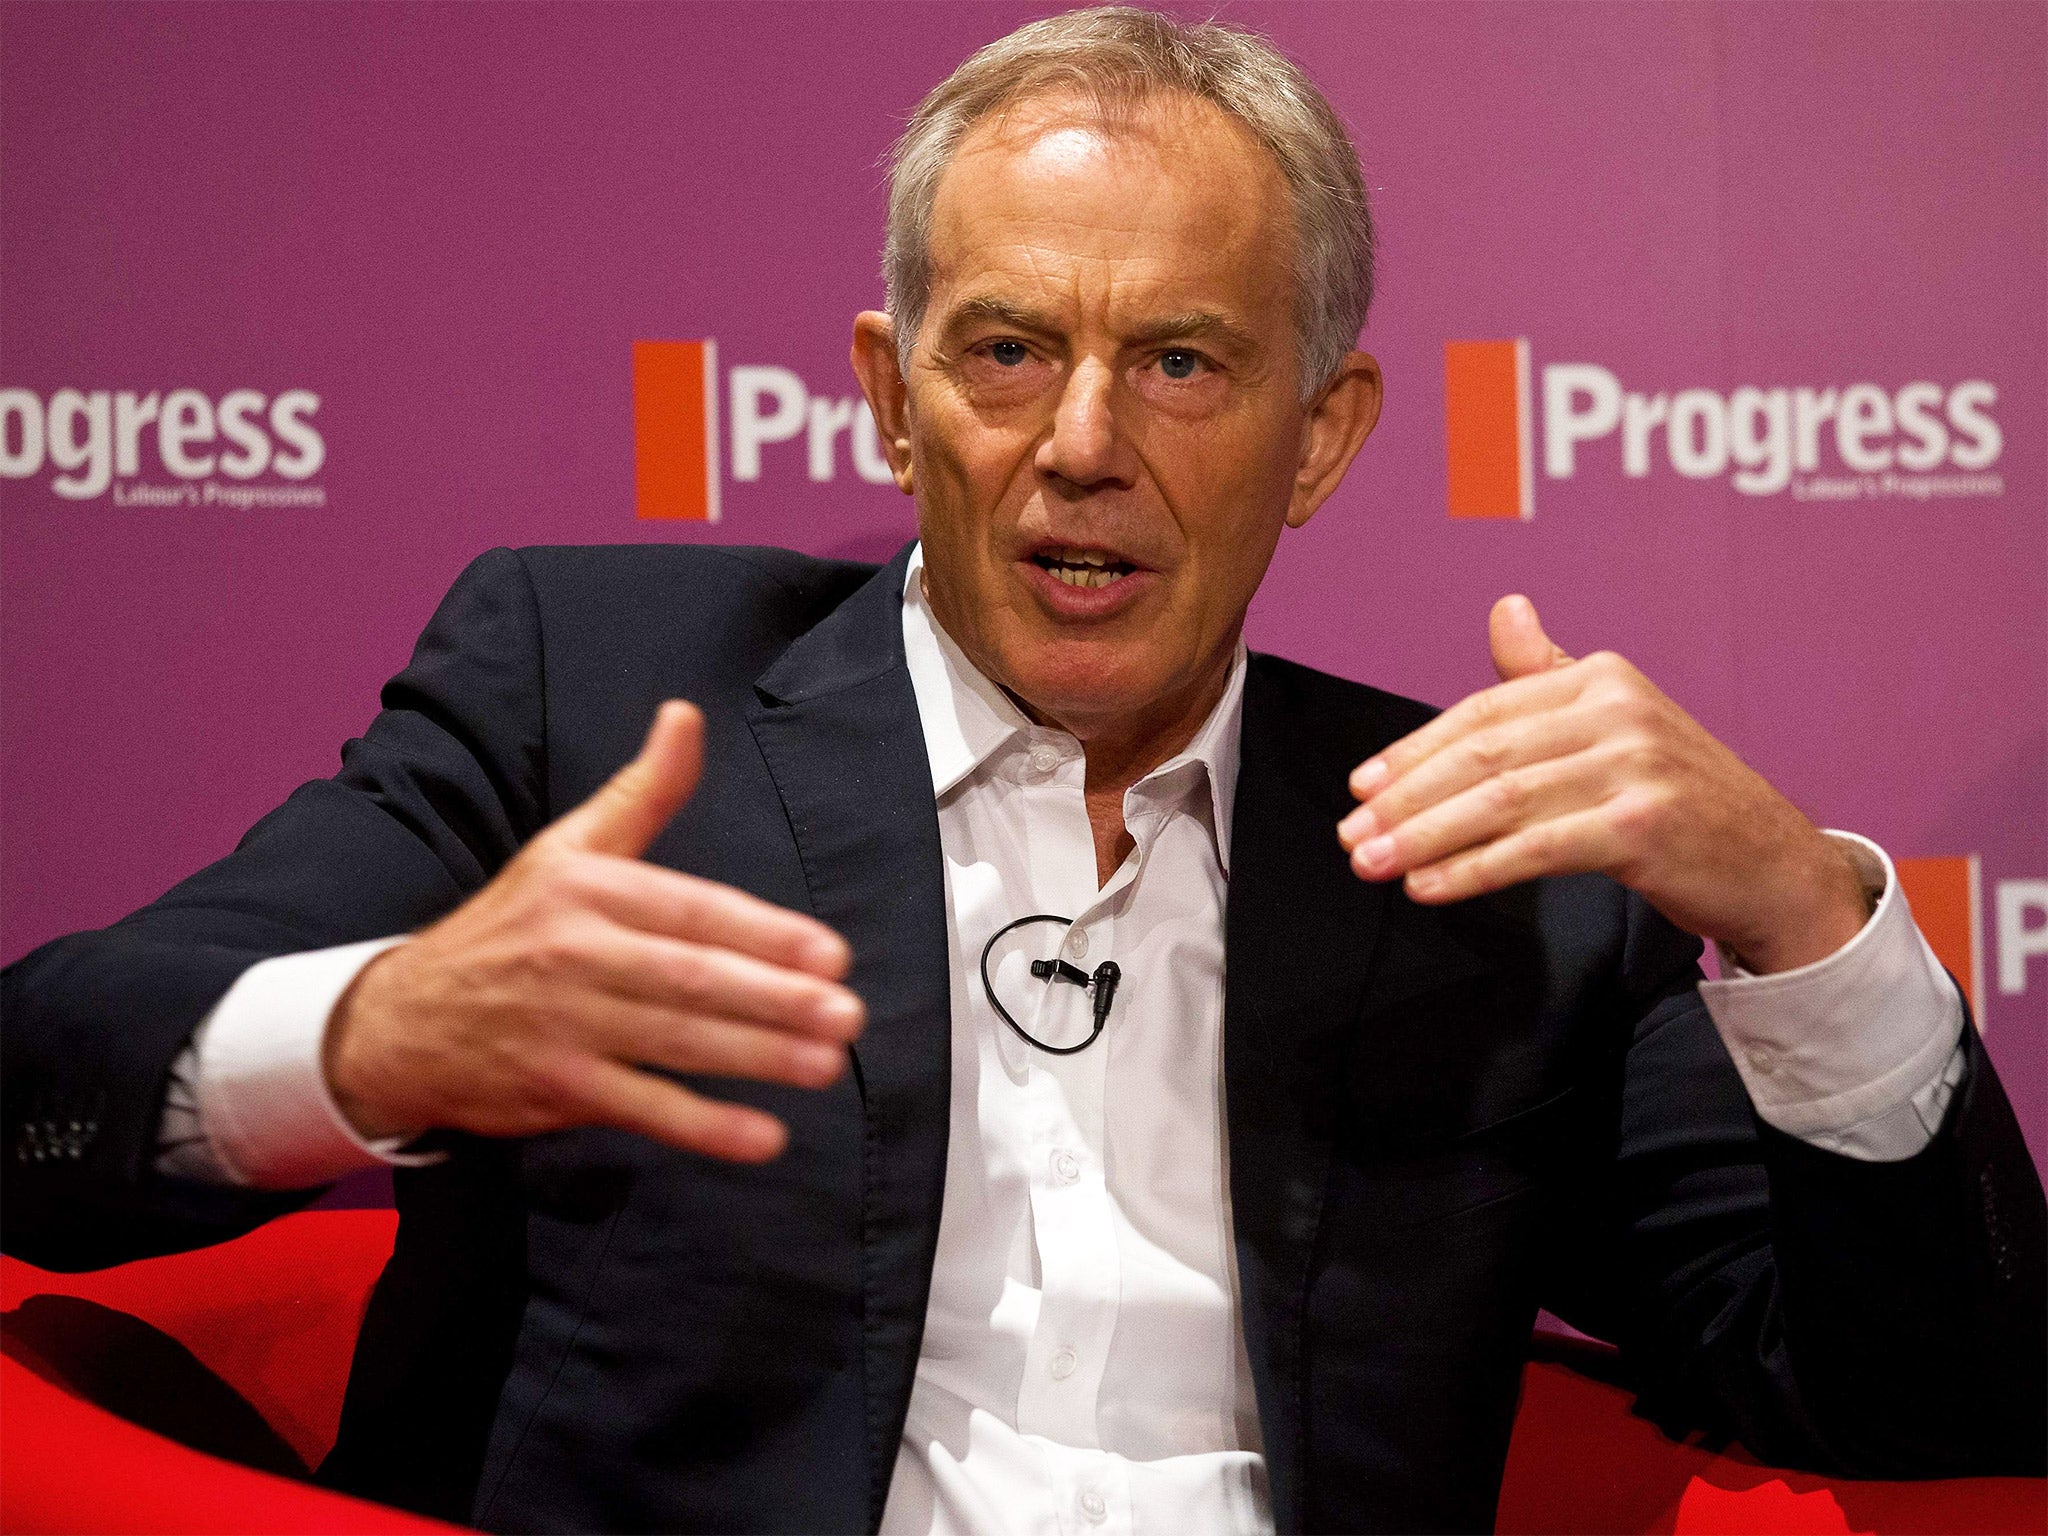 Tony Blair delivers a speech to the Labour modernisers’ think-tank Progress